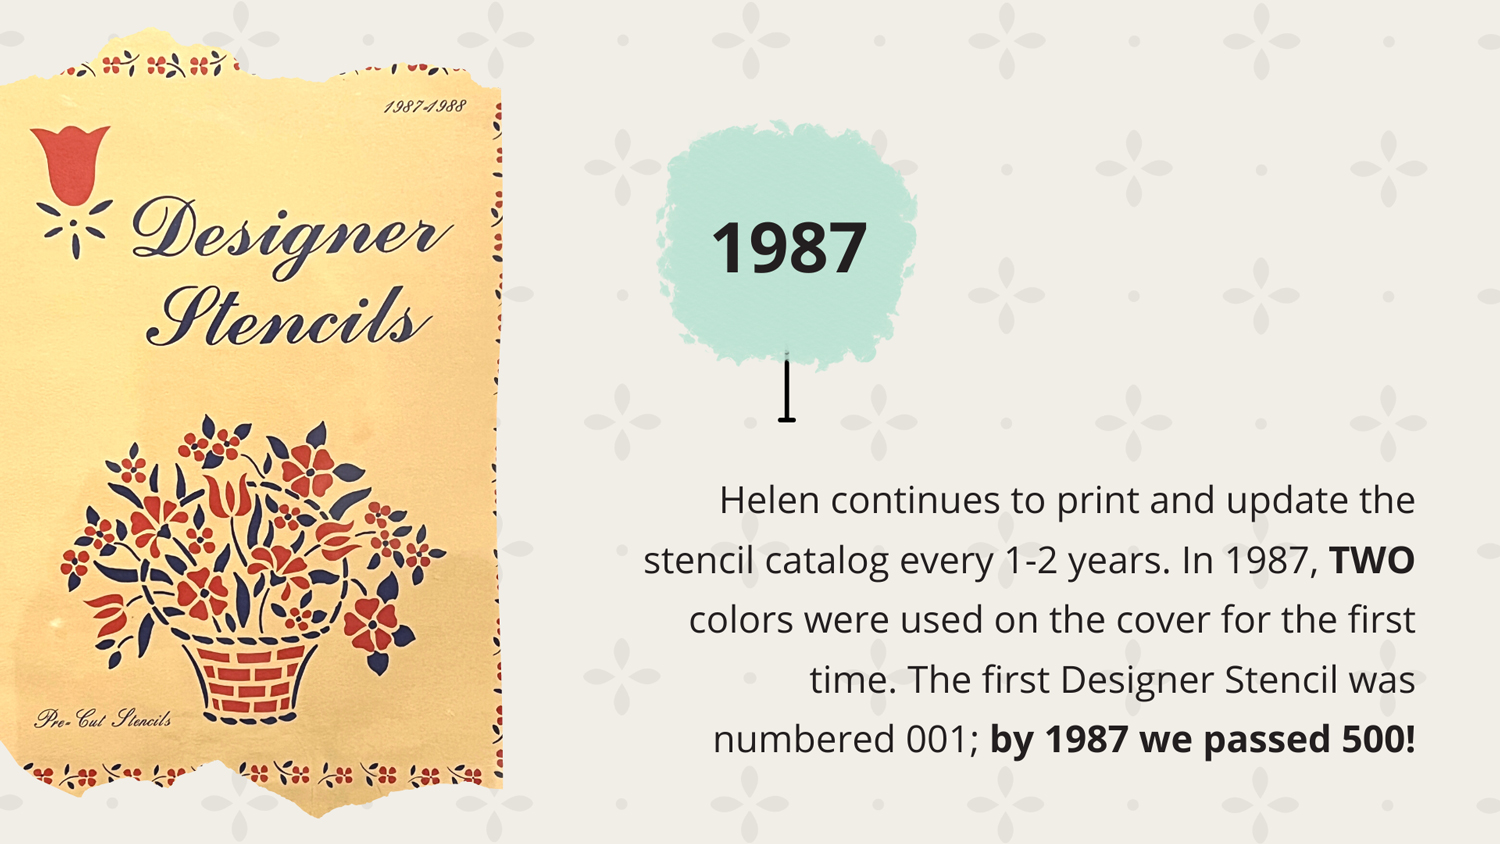 1987 - Helen continues to print and update the stencil catalog every 1-2 years. In 1987, TWO colors were used on the cover for the first time. The first Designer Stencil was numbered 001; by 1987 we passed 500!